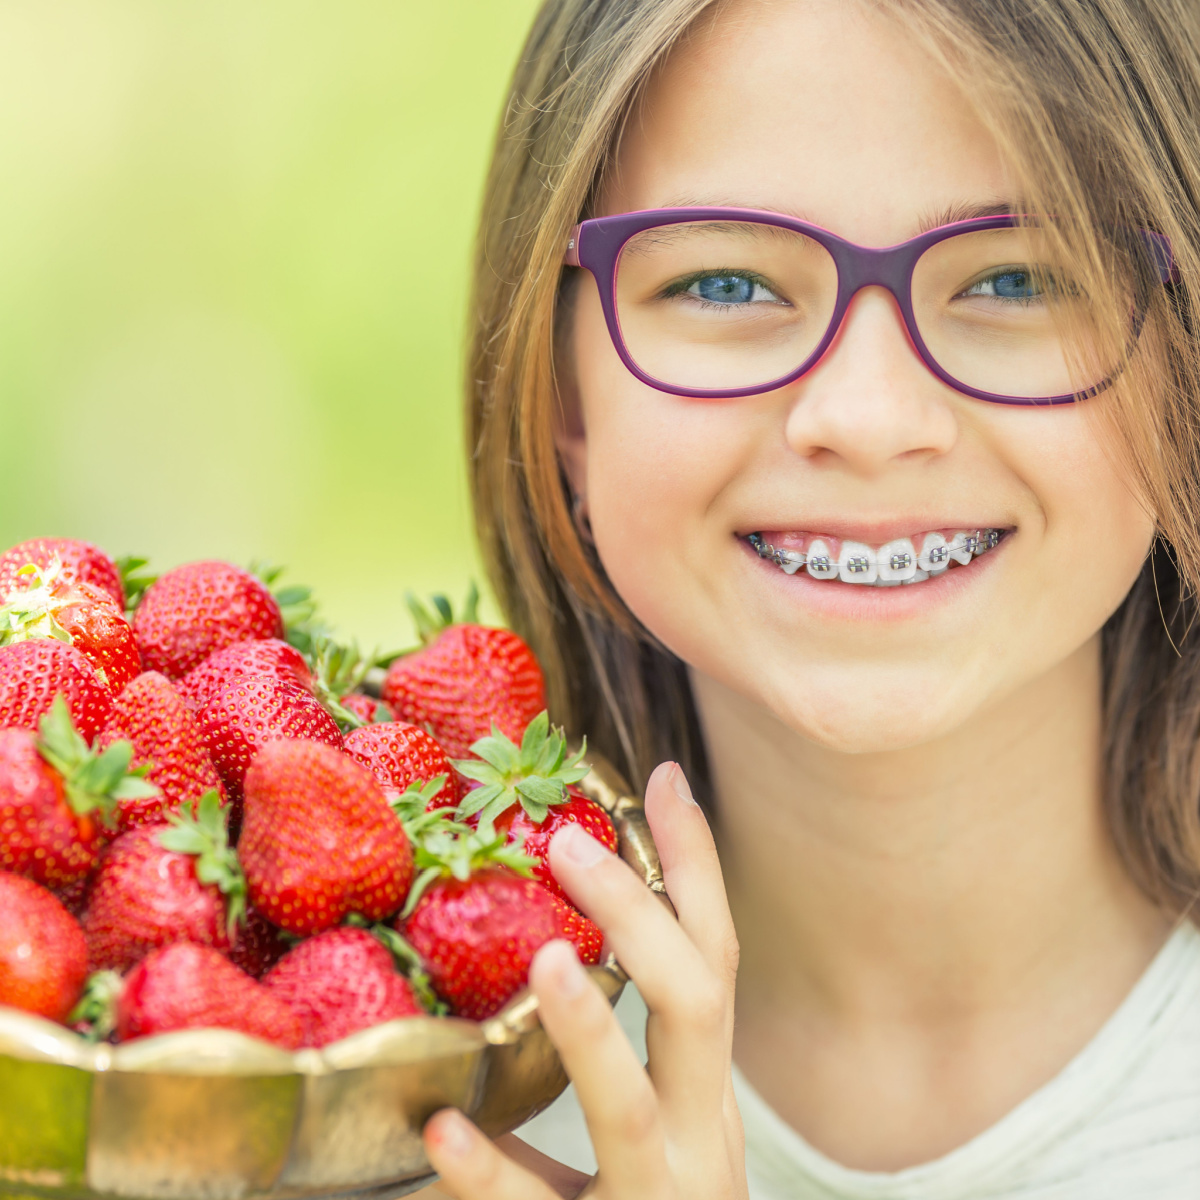 Girl holds up a basket of strawberries she can easily eat even with her South Houston dental braces.